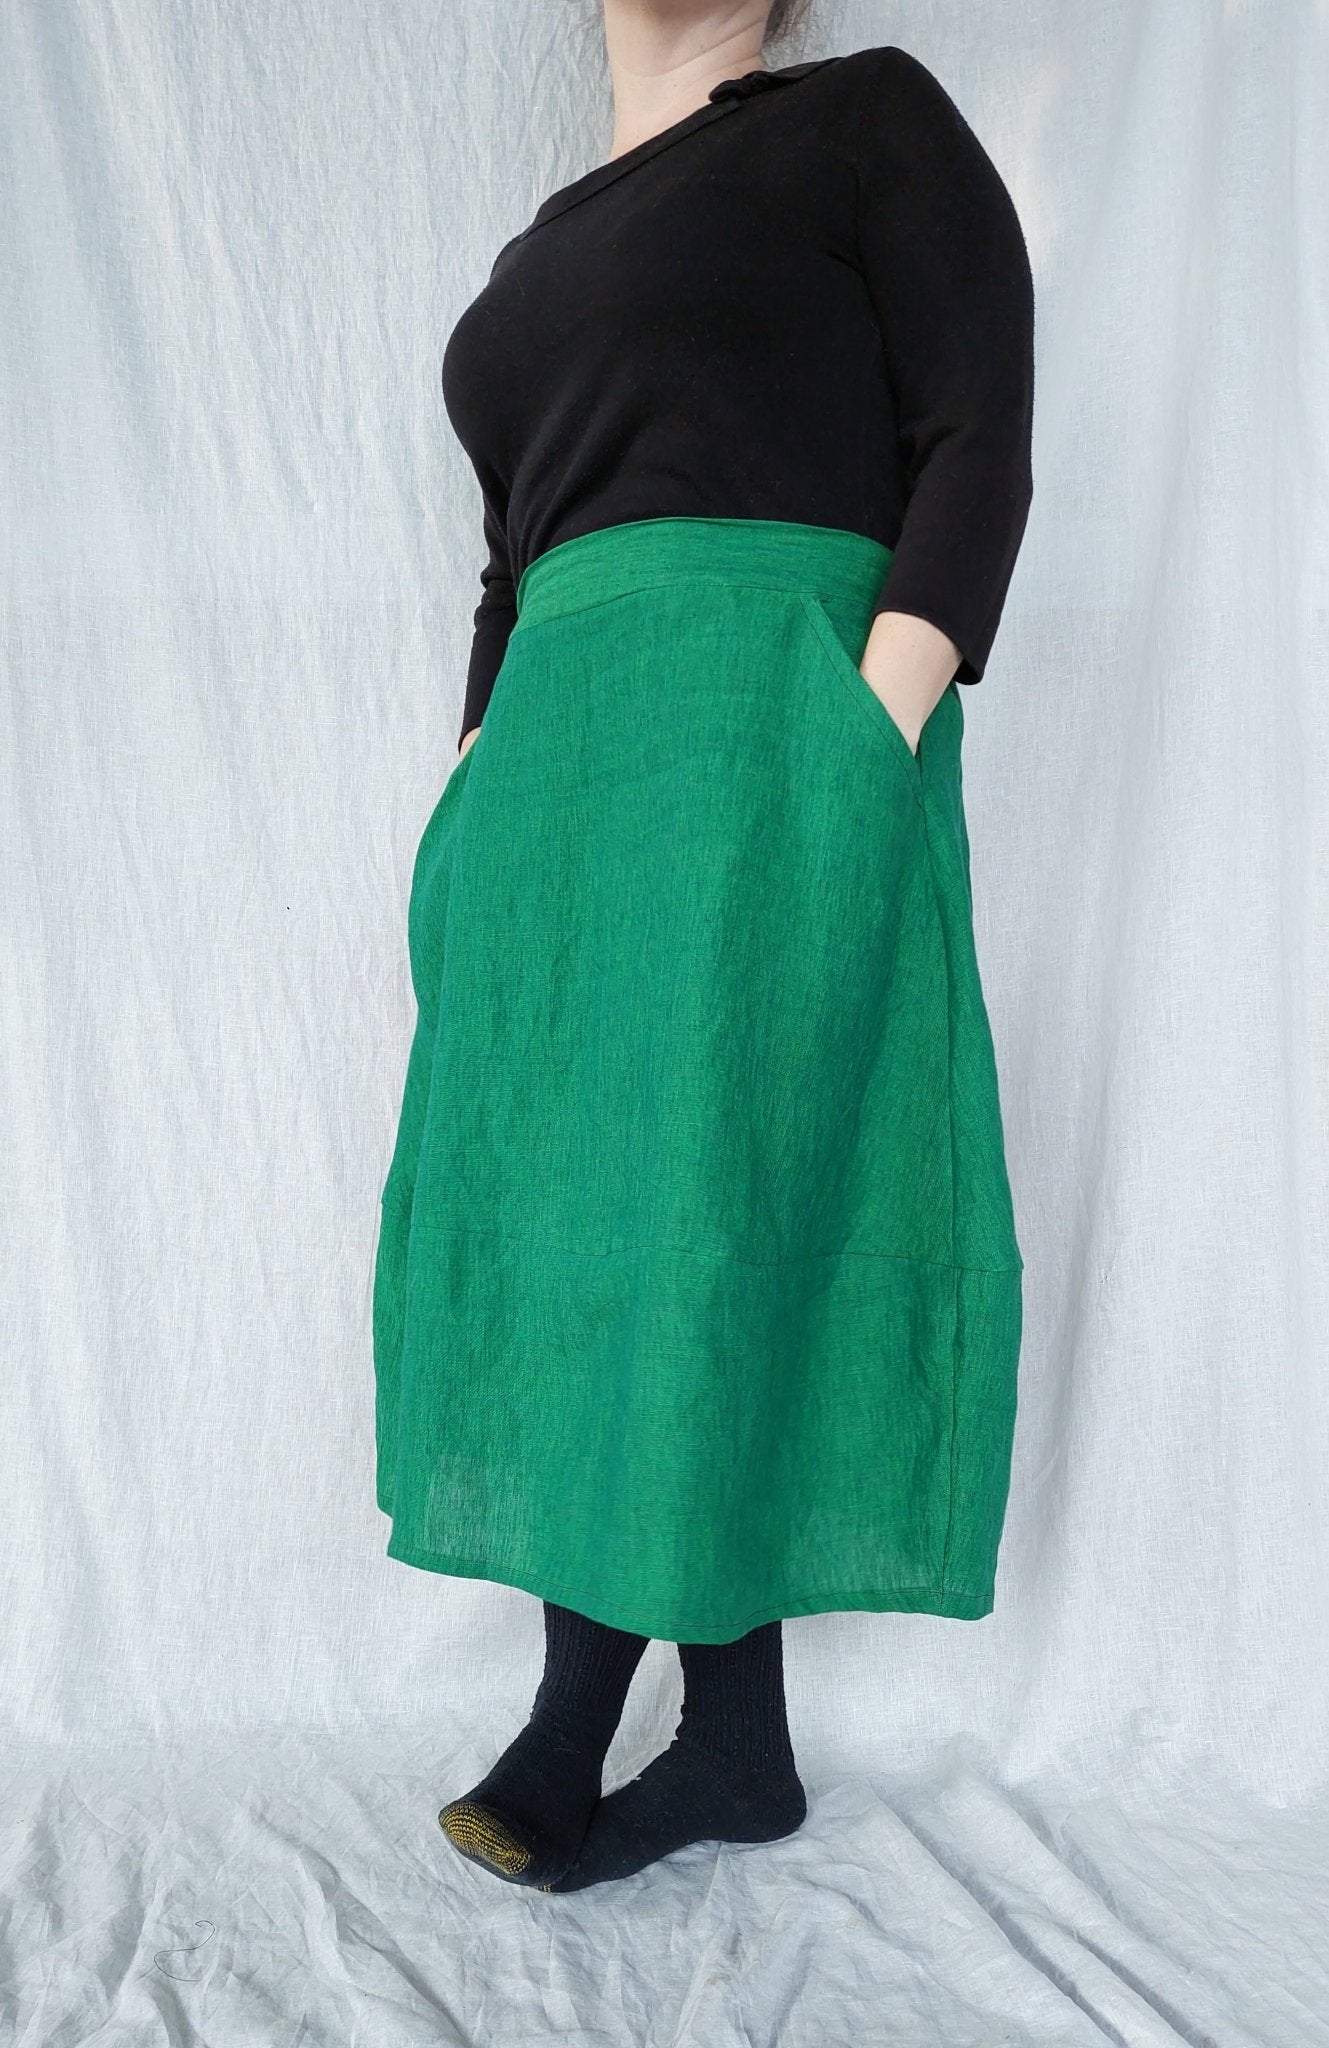 Lotus Jar Skirt Pattern Digital File Download (Free with Fabric Purchase) - The Linen Lab -